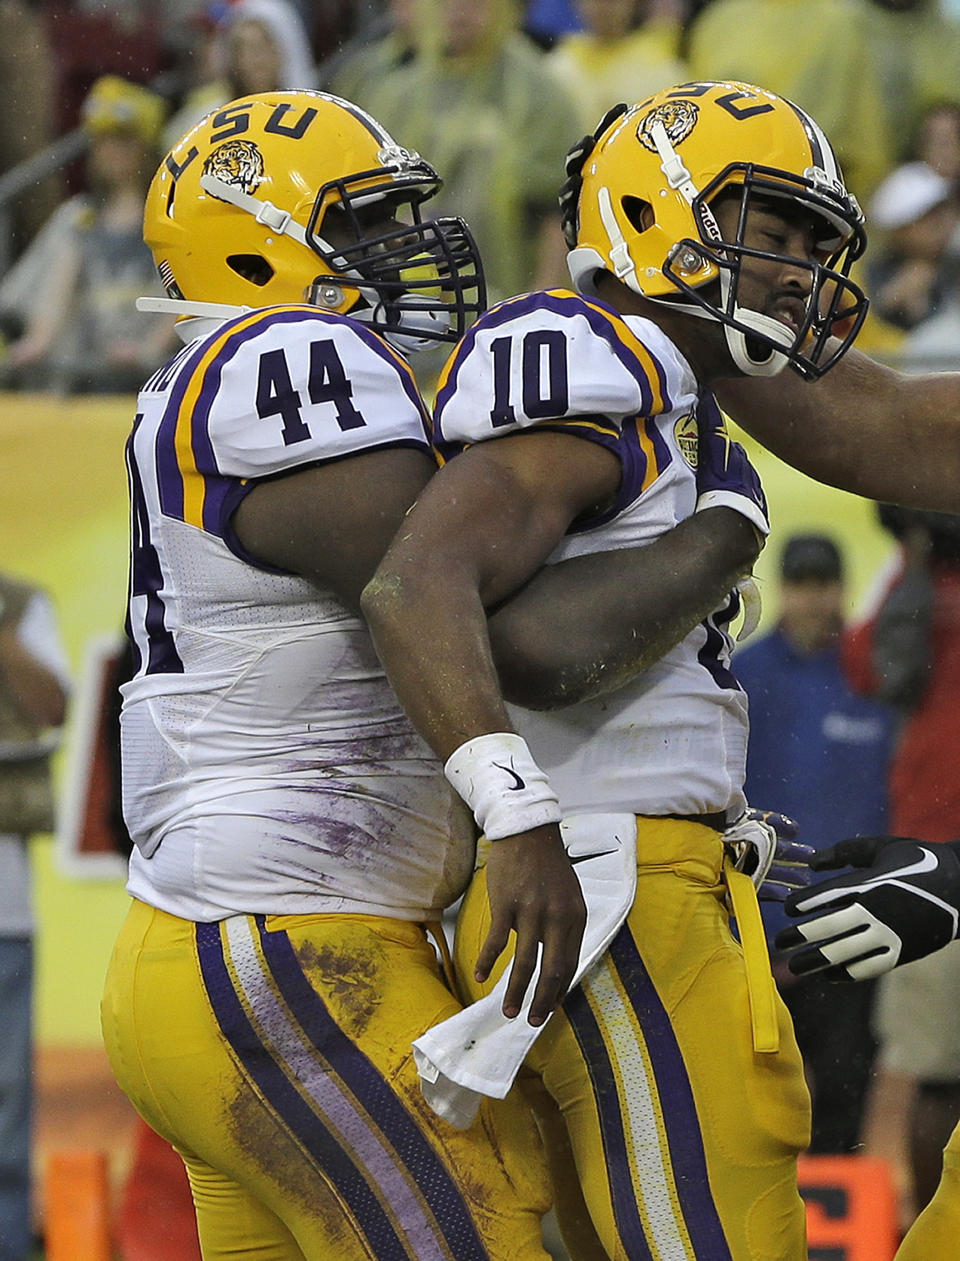 LSU quarterback Anthony Jennings (10) gets a hug from teammate fullback J.C. Copeland (44) after Jenning scored on a 2-yard touchdown run during the first quarter of the Outback Bowl NCAA college football game against Iowa Wednesday, Jan. 1, 2014, in Tampa, Fla. (AP Photo/Chris O'Meara)